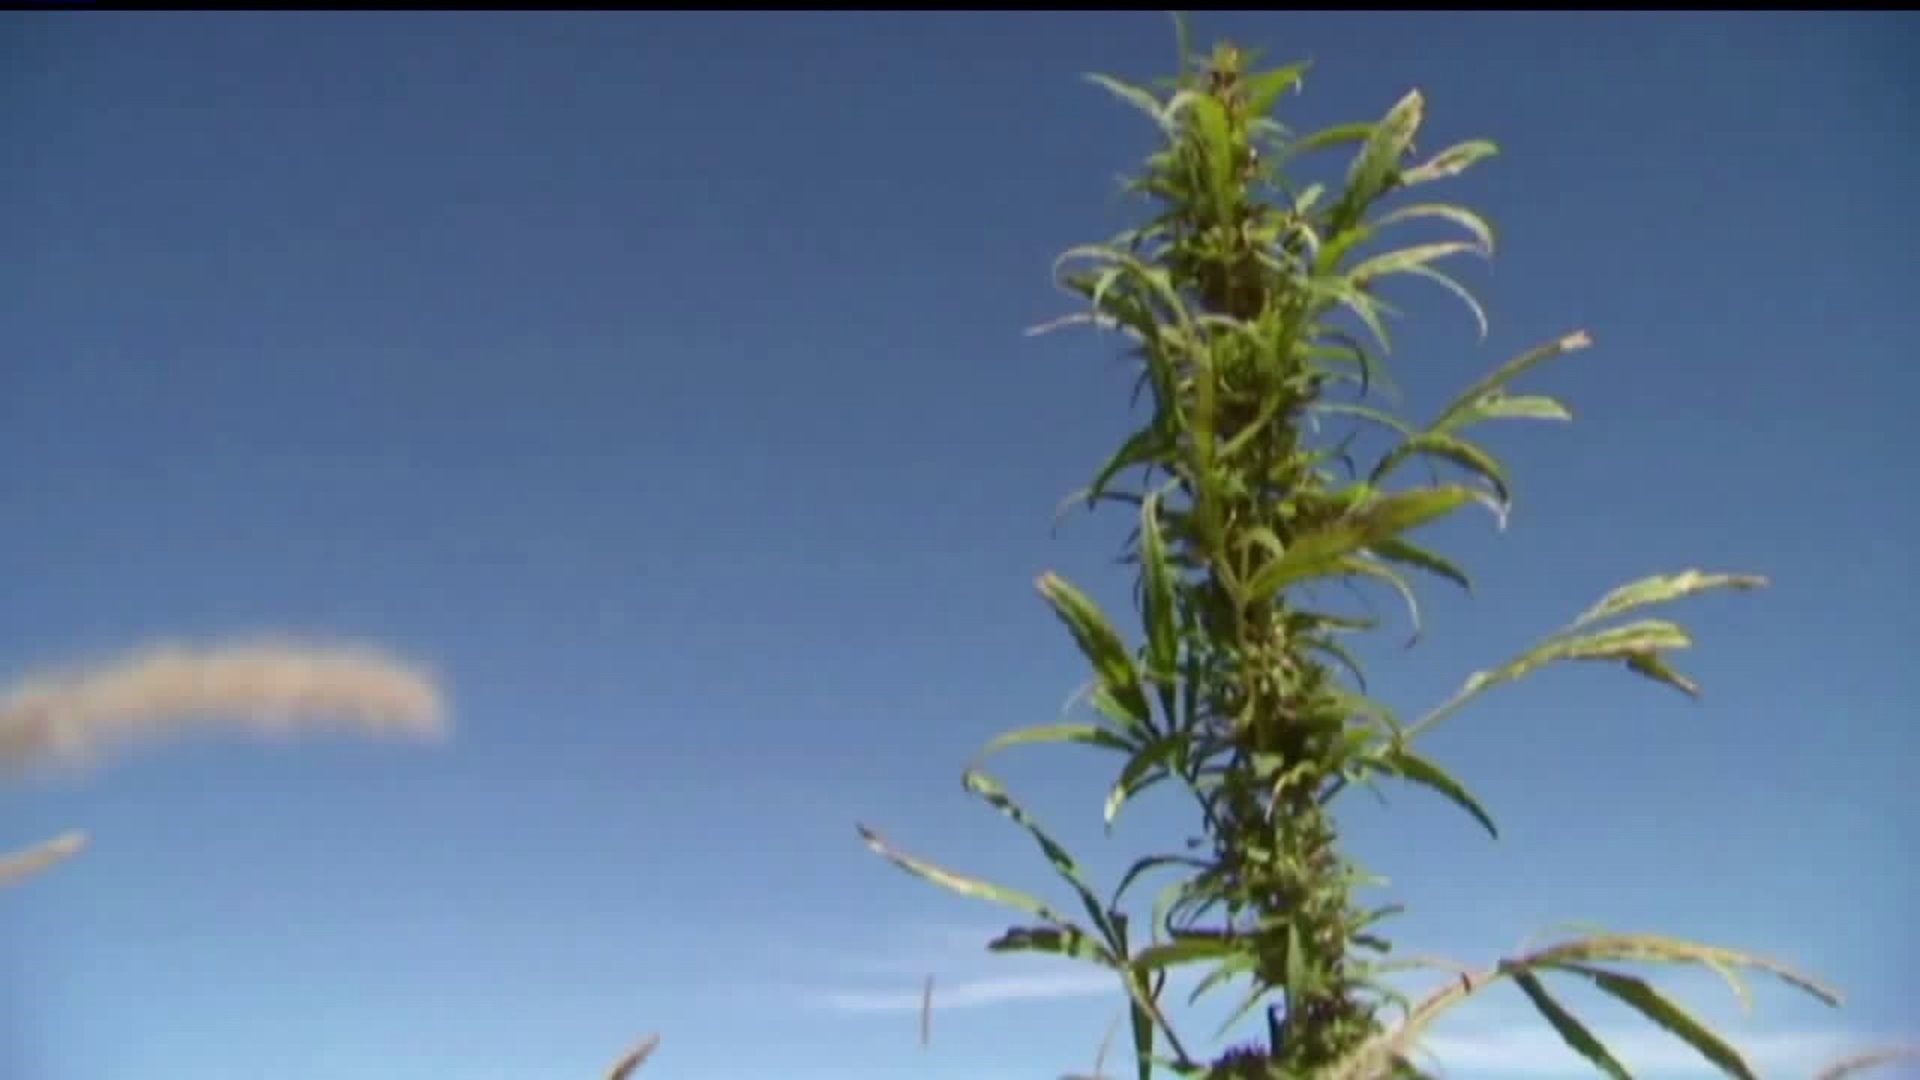 Researchers look to study industrial hemp in Lancaster County